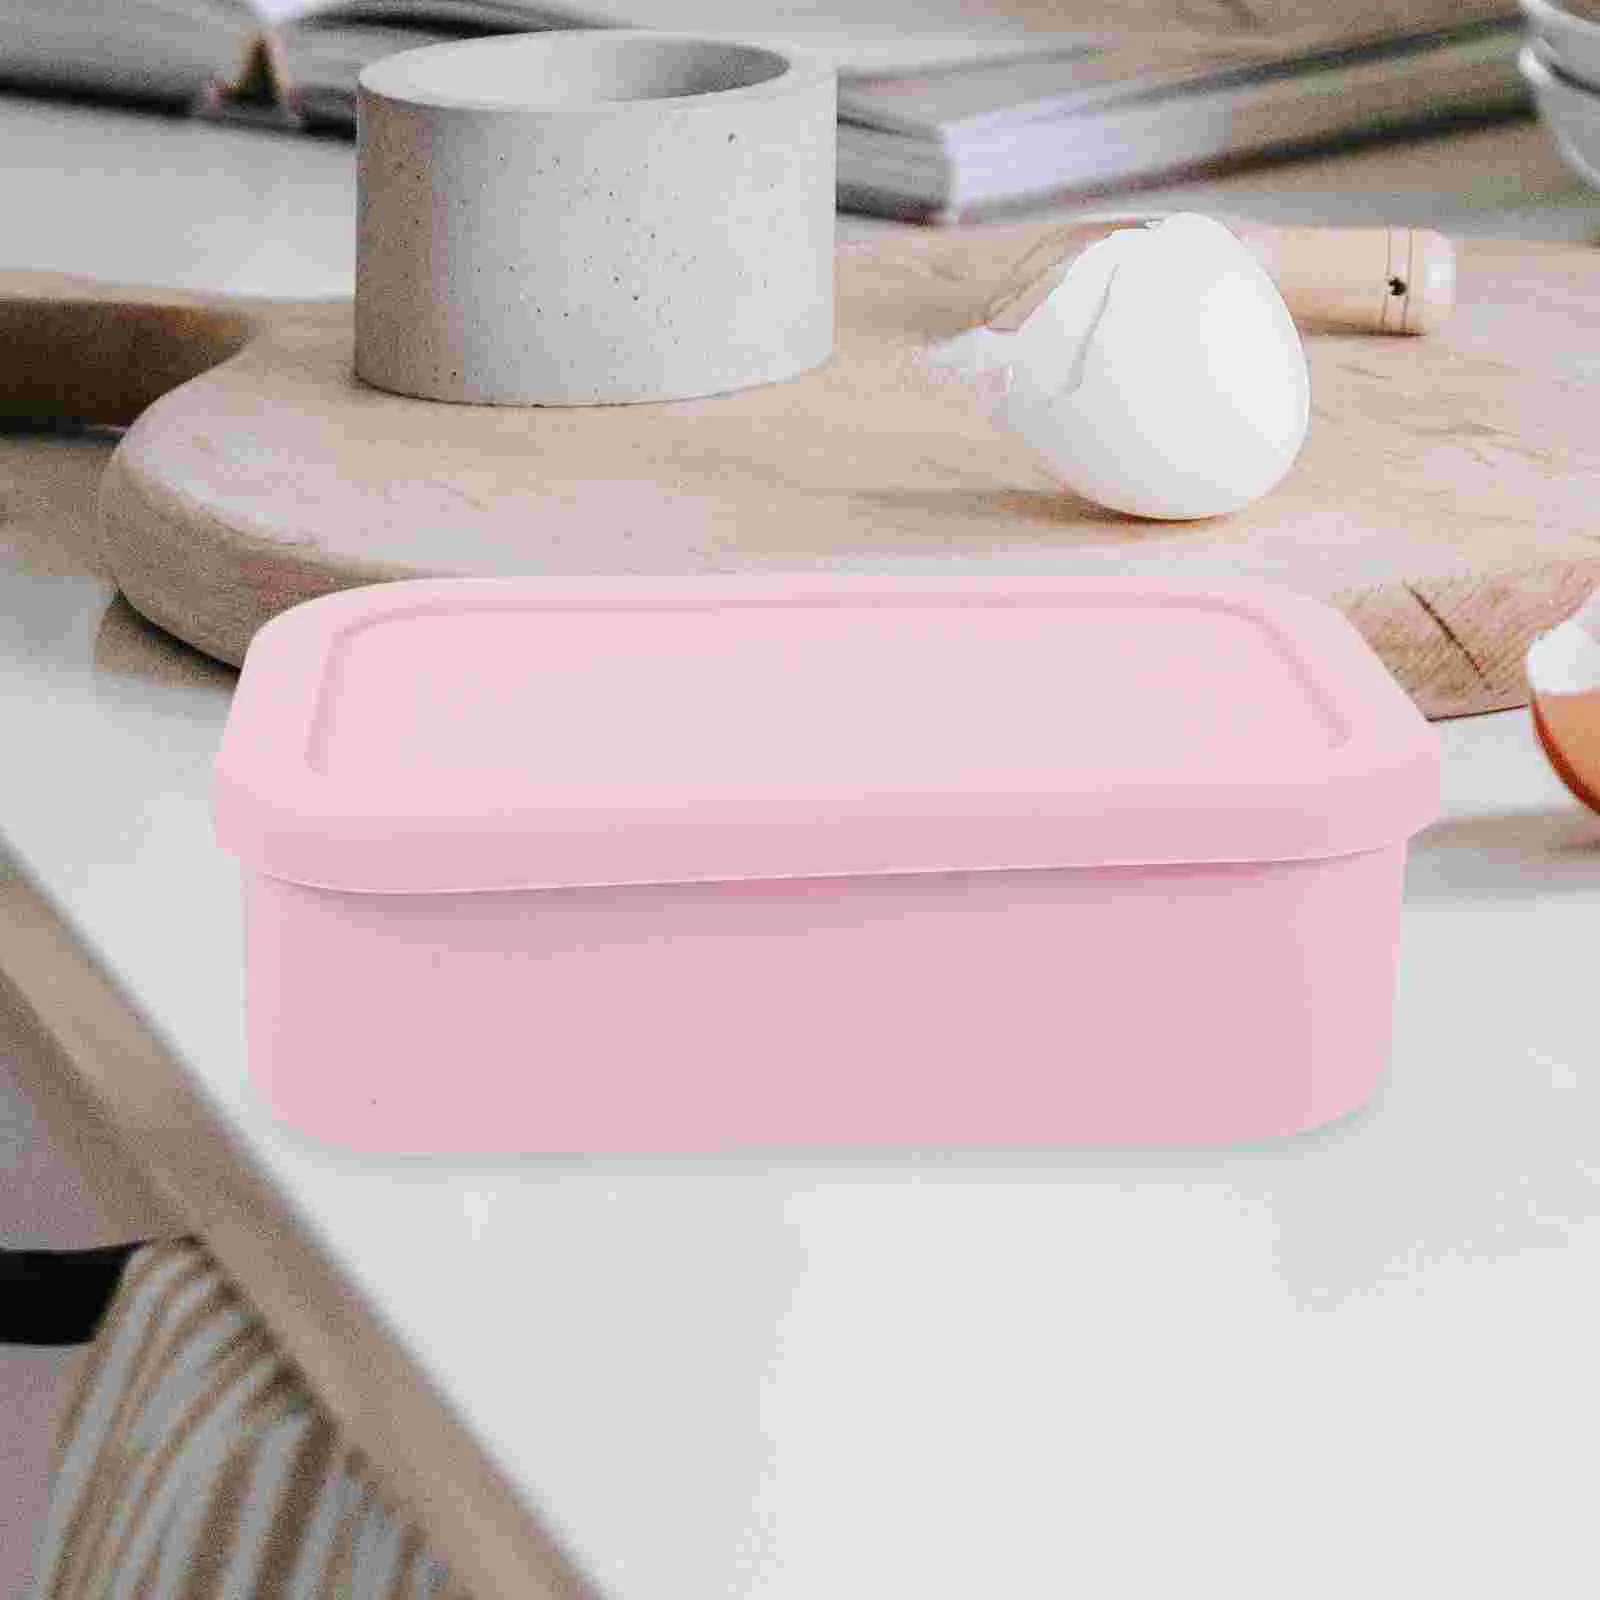 

Box Lunch Bento Containers Divided Snack Storage Meal Kitchen Adult Prep Kids Container Food Compartment Silicone Organizer